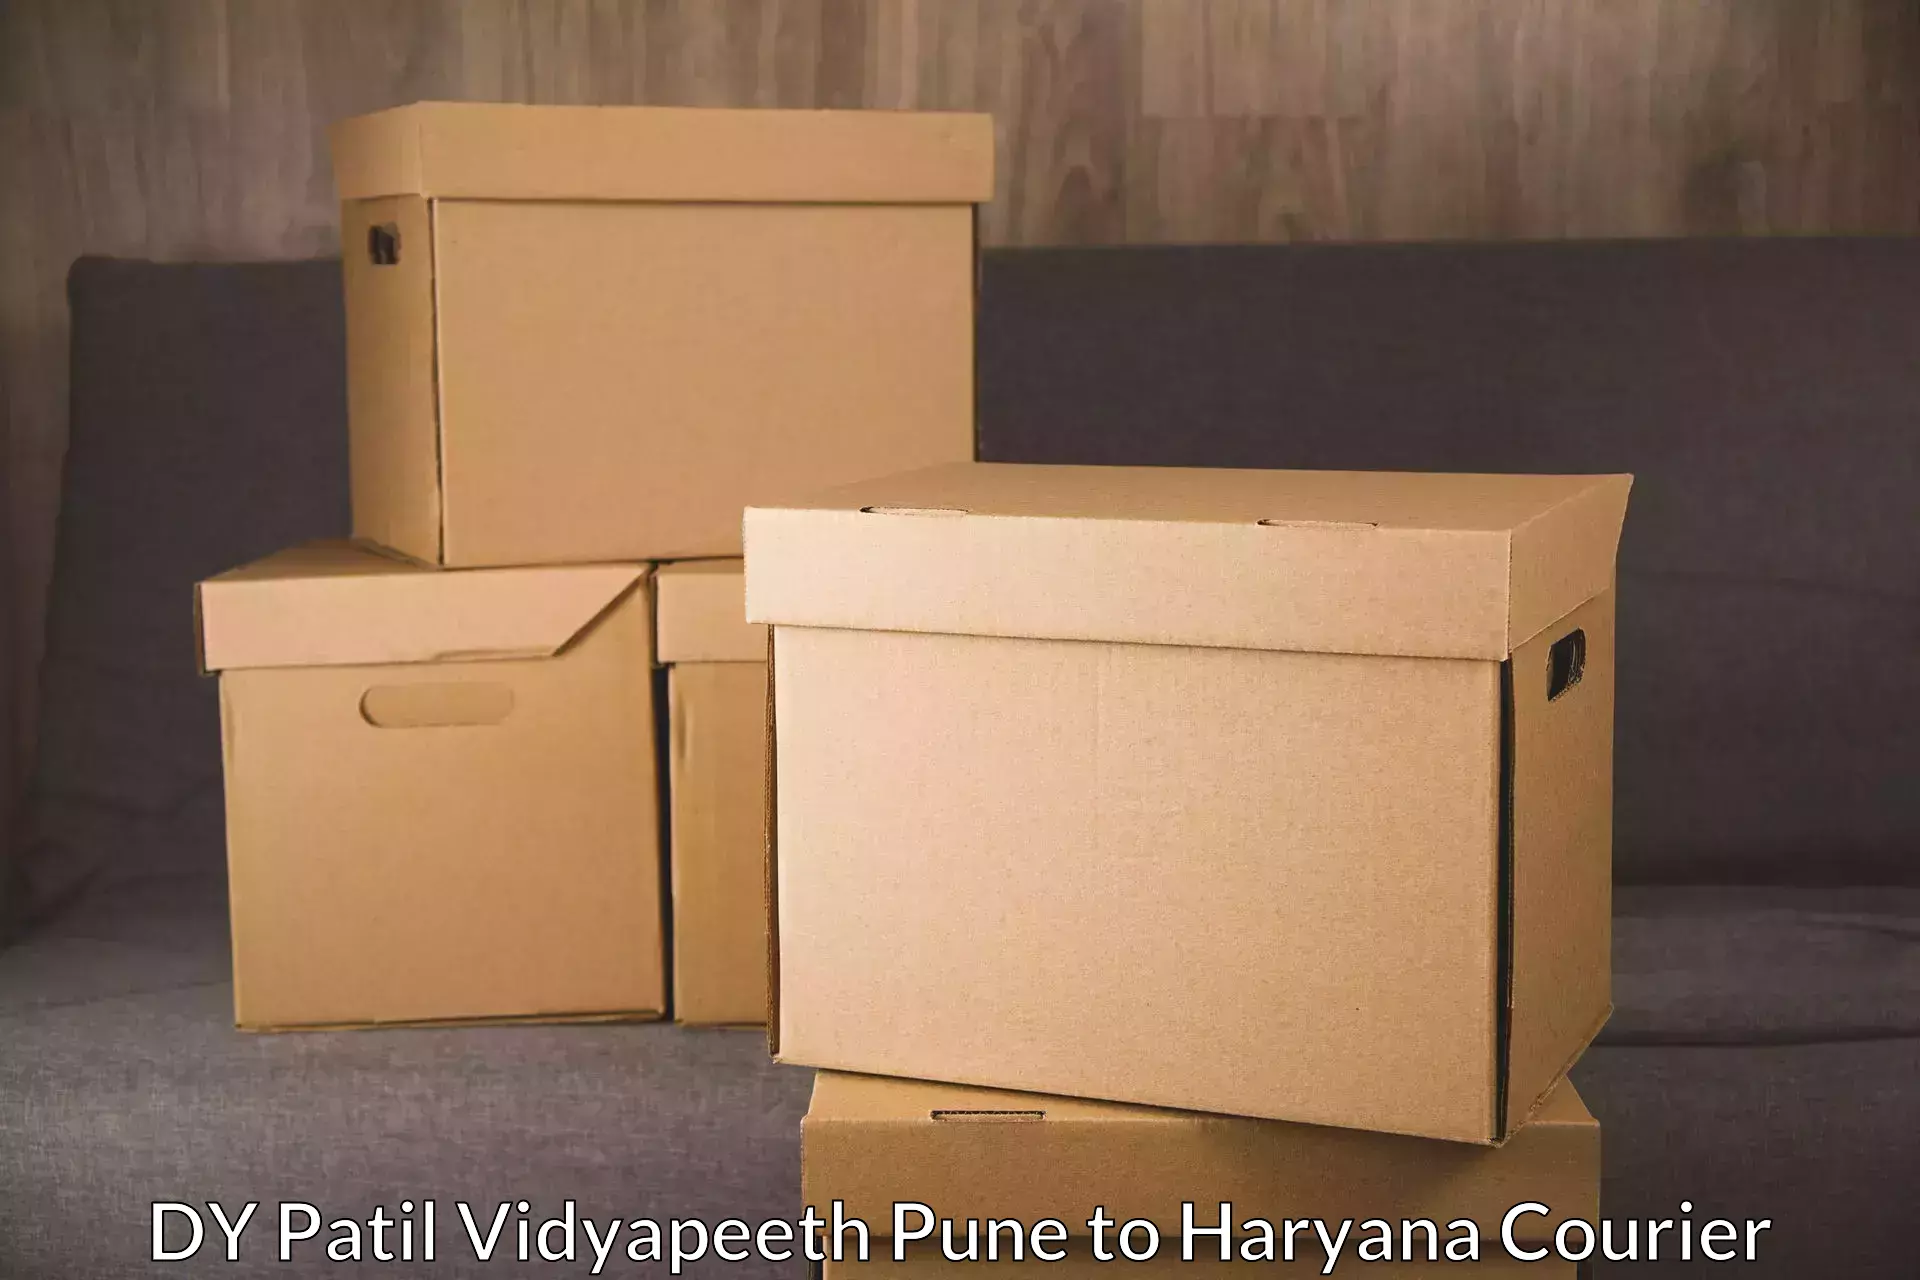 Cargo delivery service DY Patil Vidyapeeth Pune to Odhan